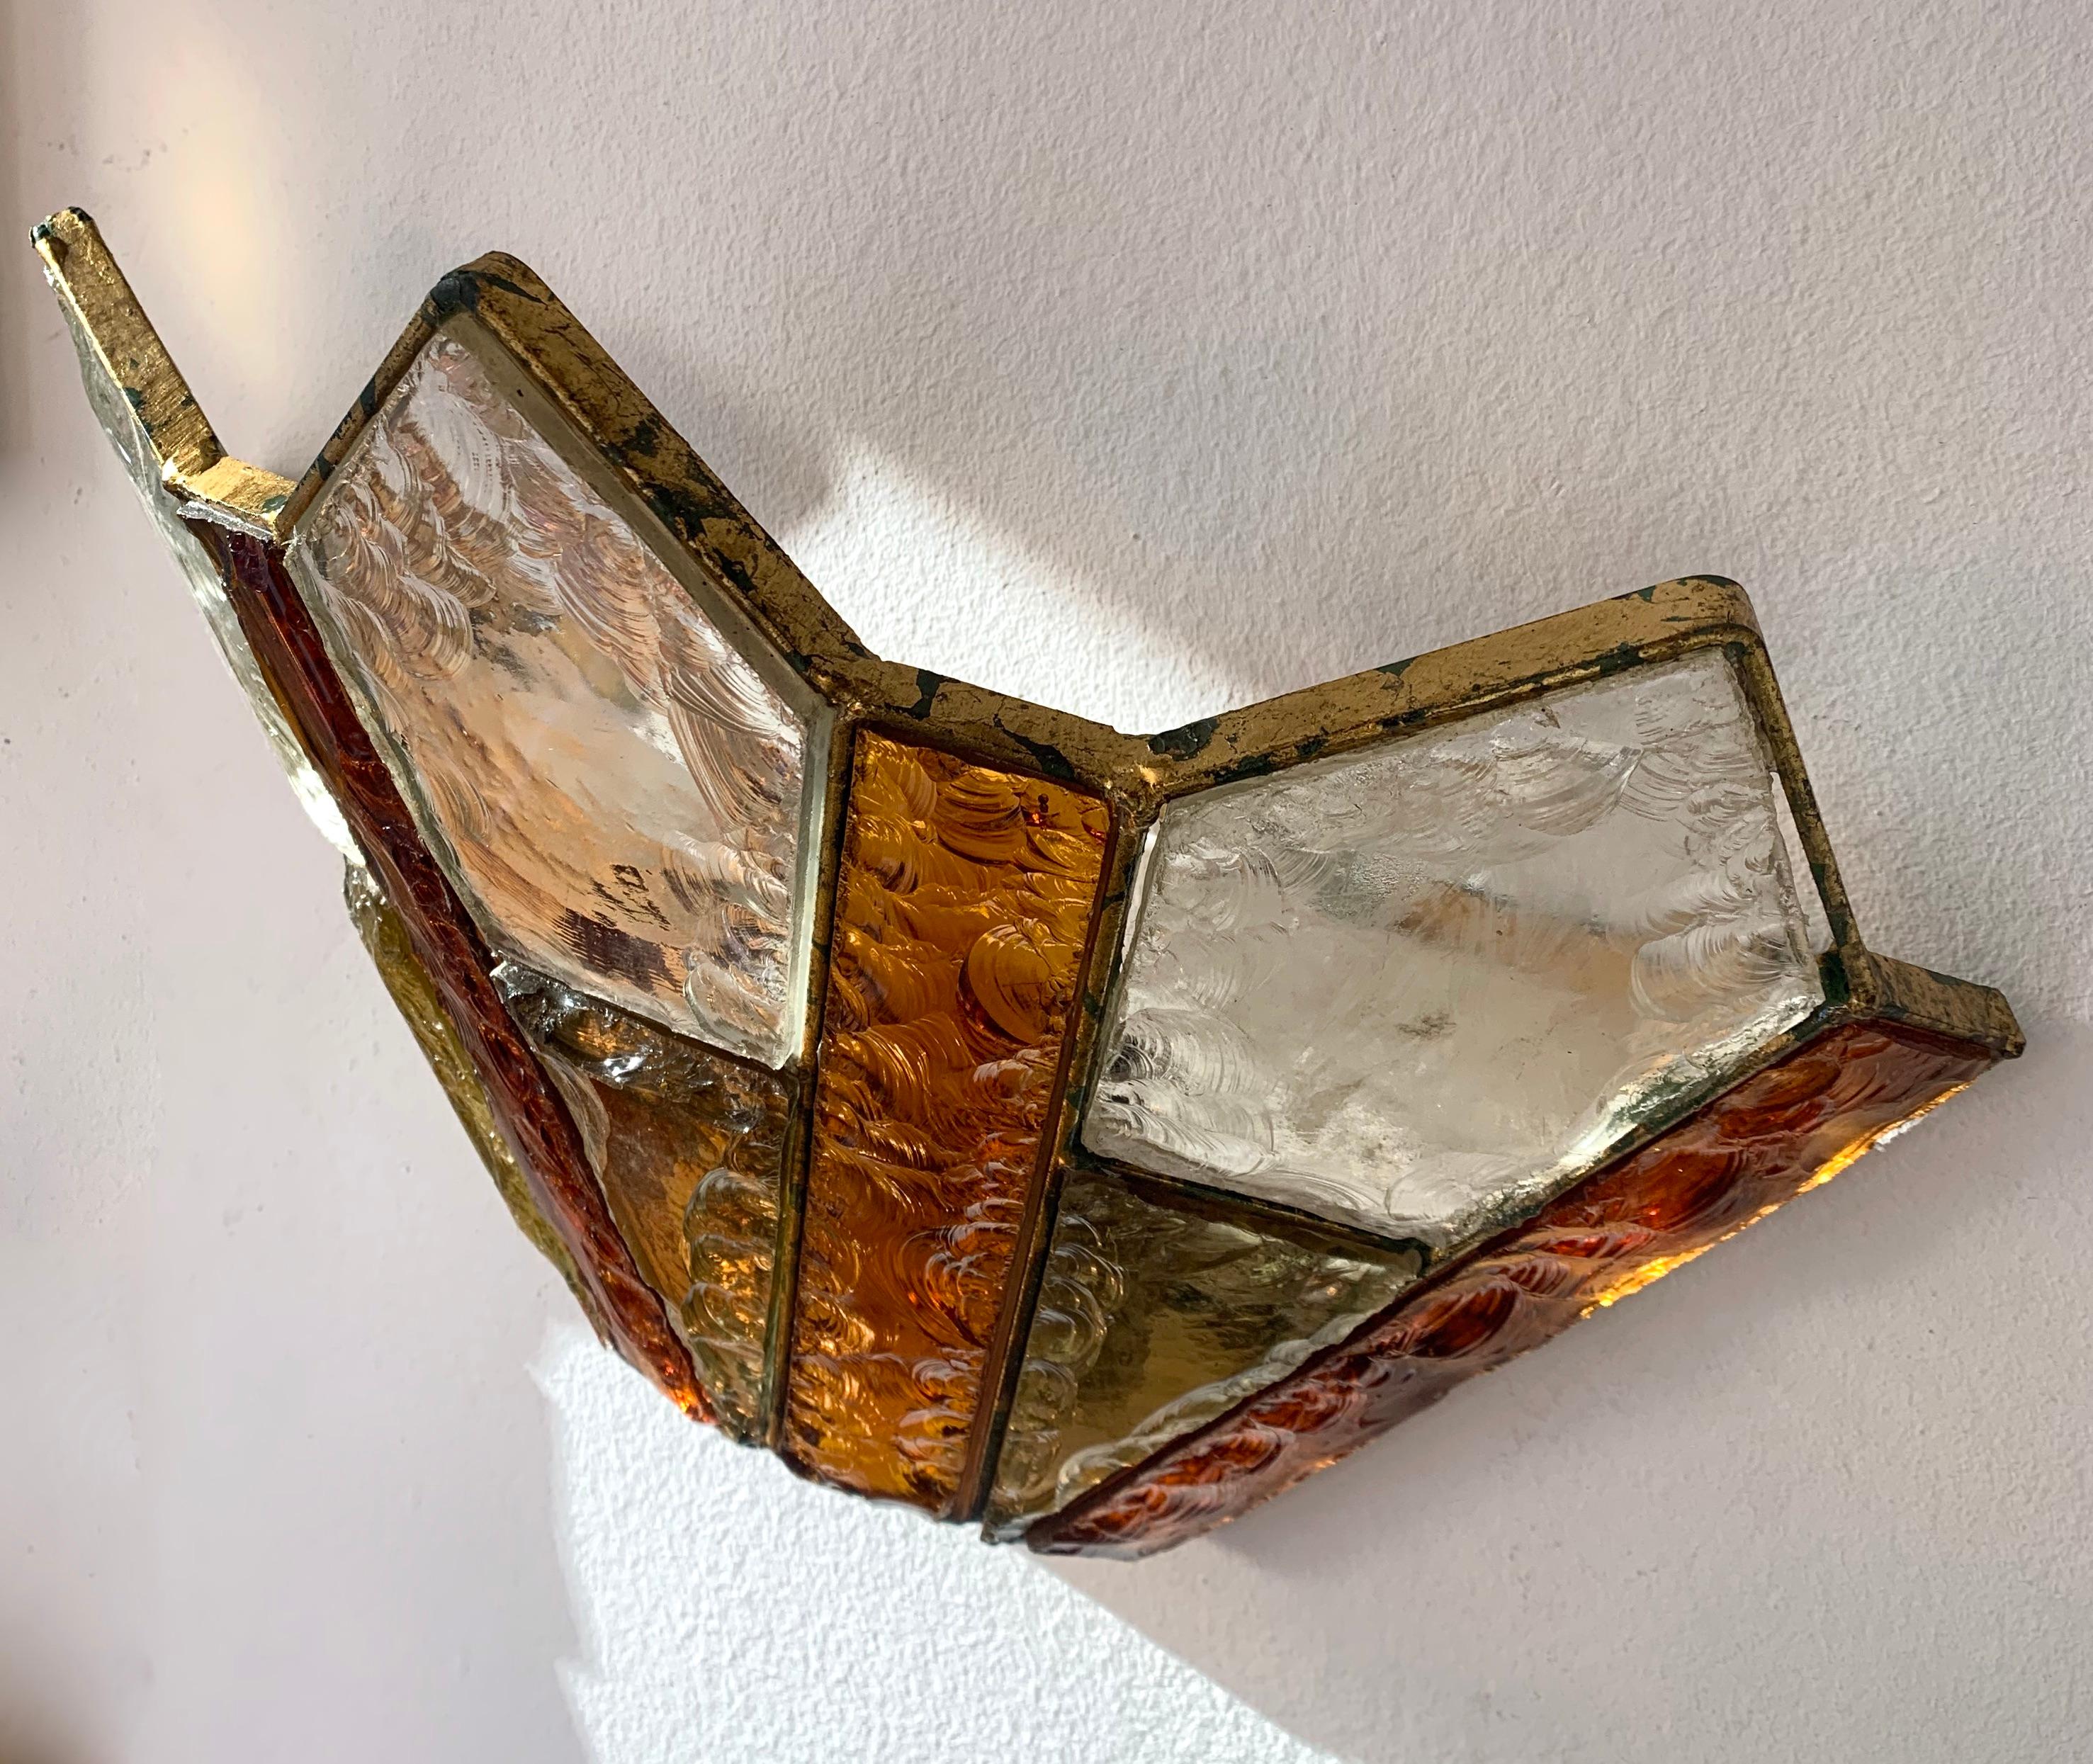 Pair of wall light lamp sconces amber, yellow and clear hammered glass, wrought iron and gold leaf with a patina work by the manufacture Longobard the concurent of Poliarte during the 1970s. Famous design like Mazzega Murano, Venini, Vistosi, La